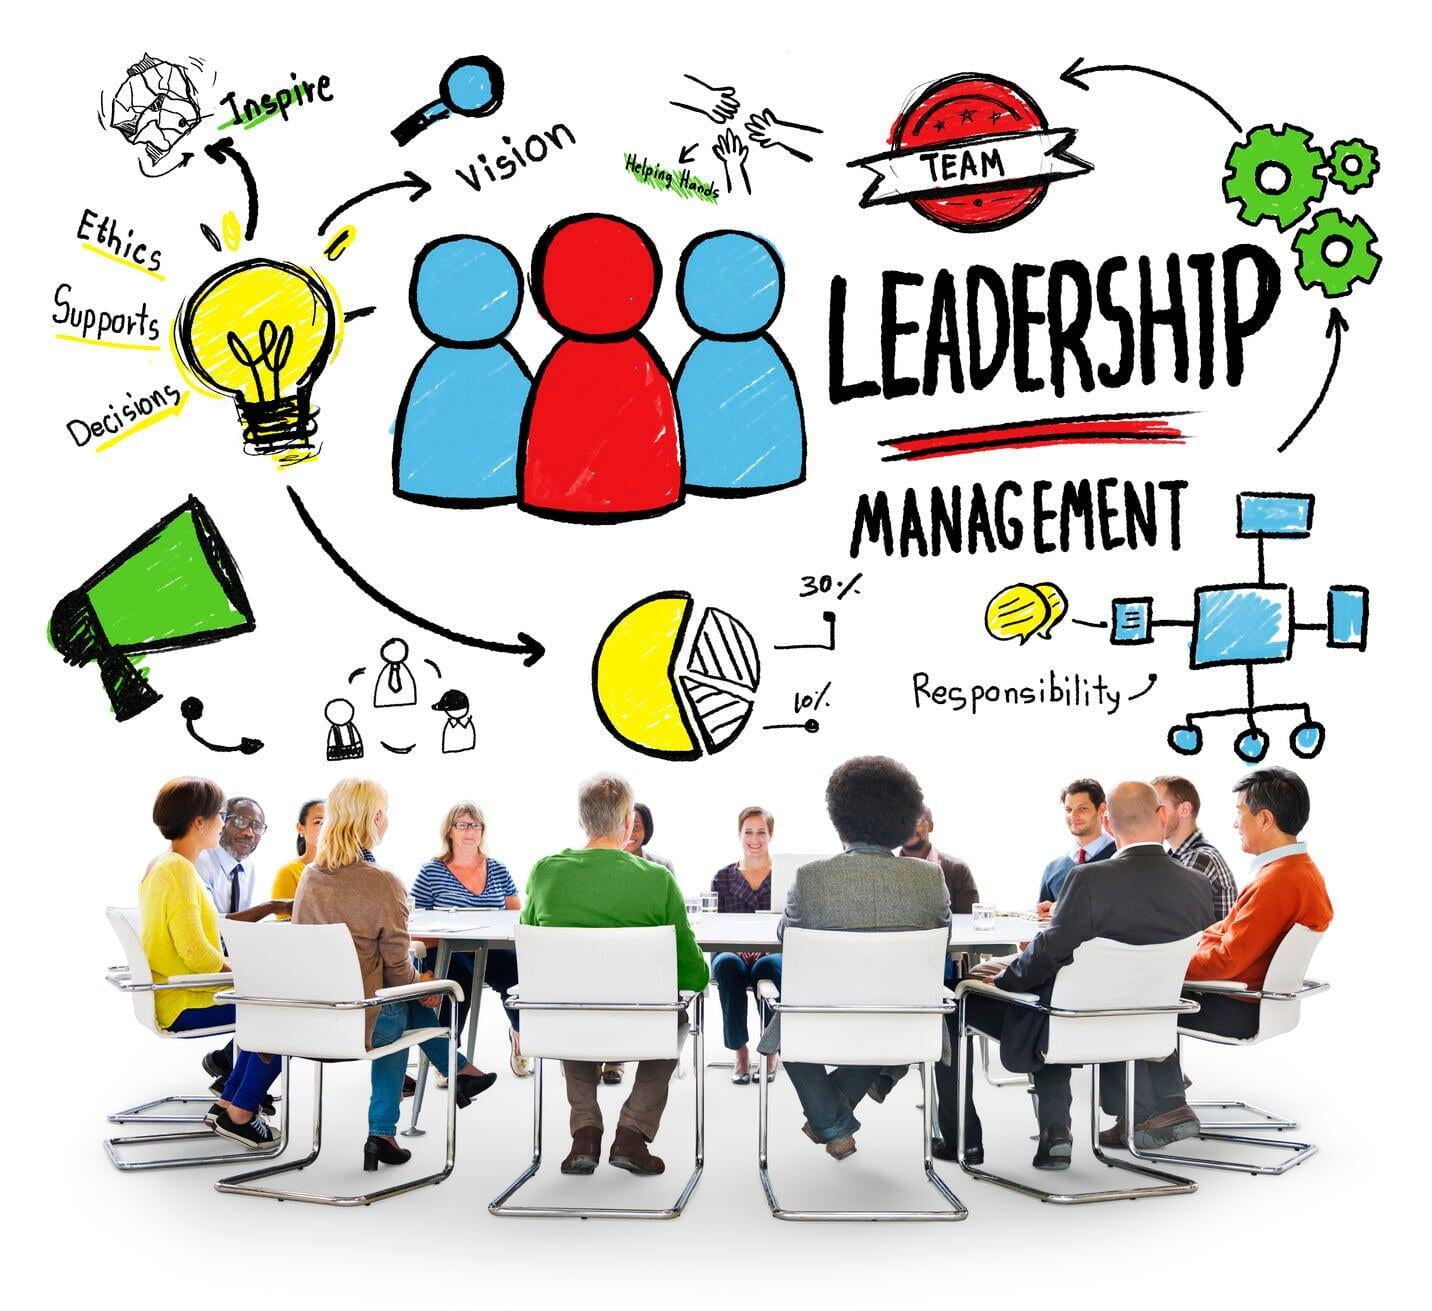 Leadership and Management - Two Sides of The Same Coin